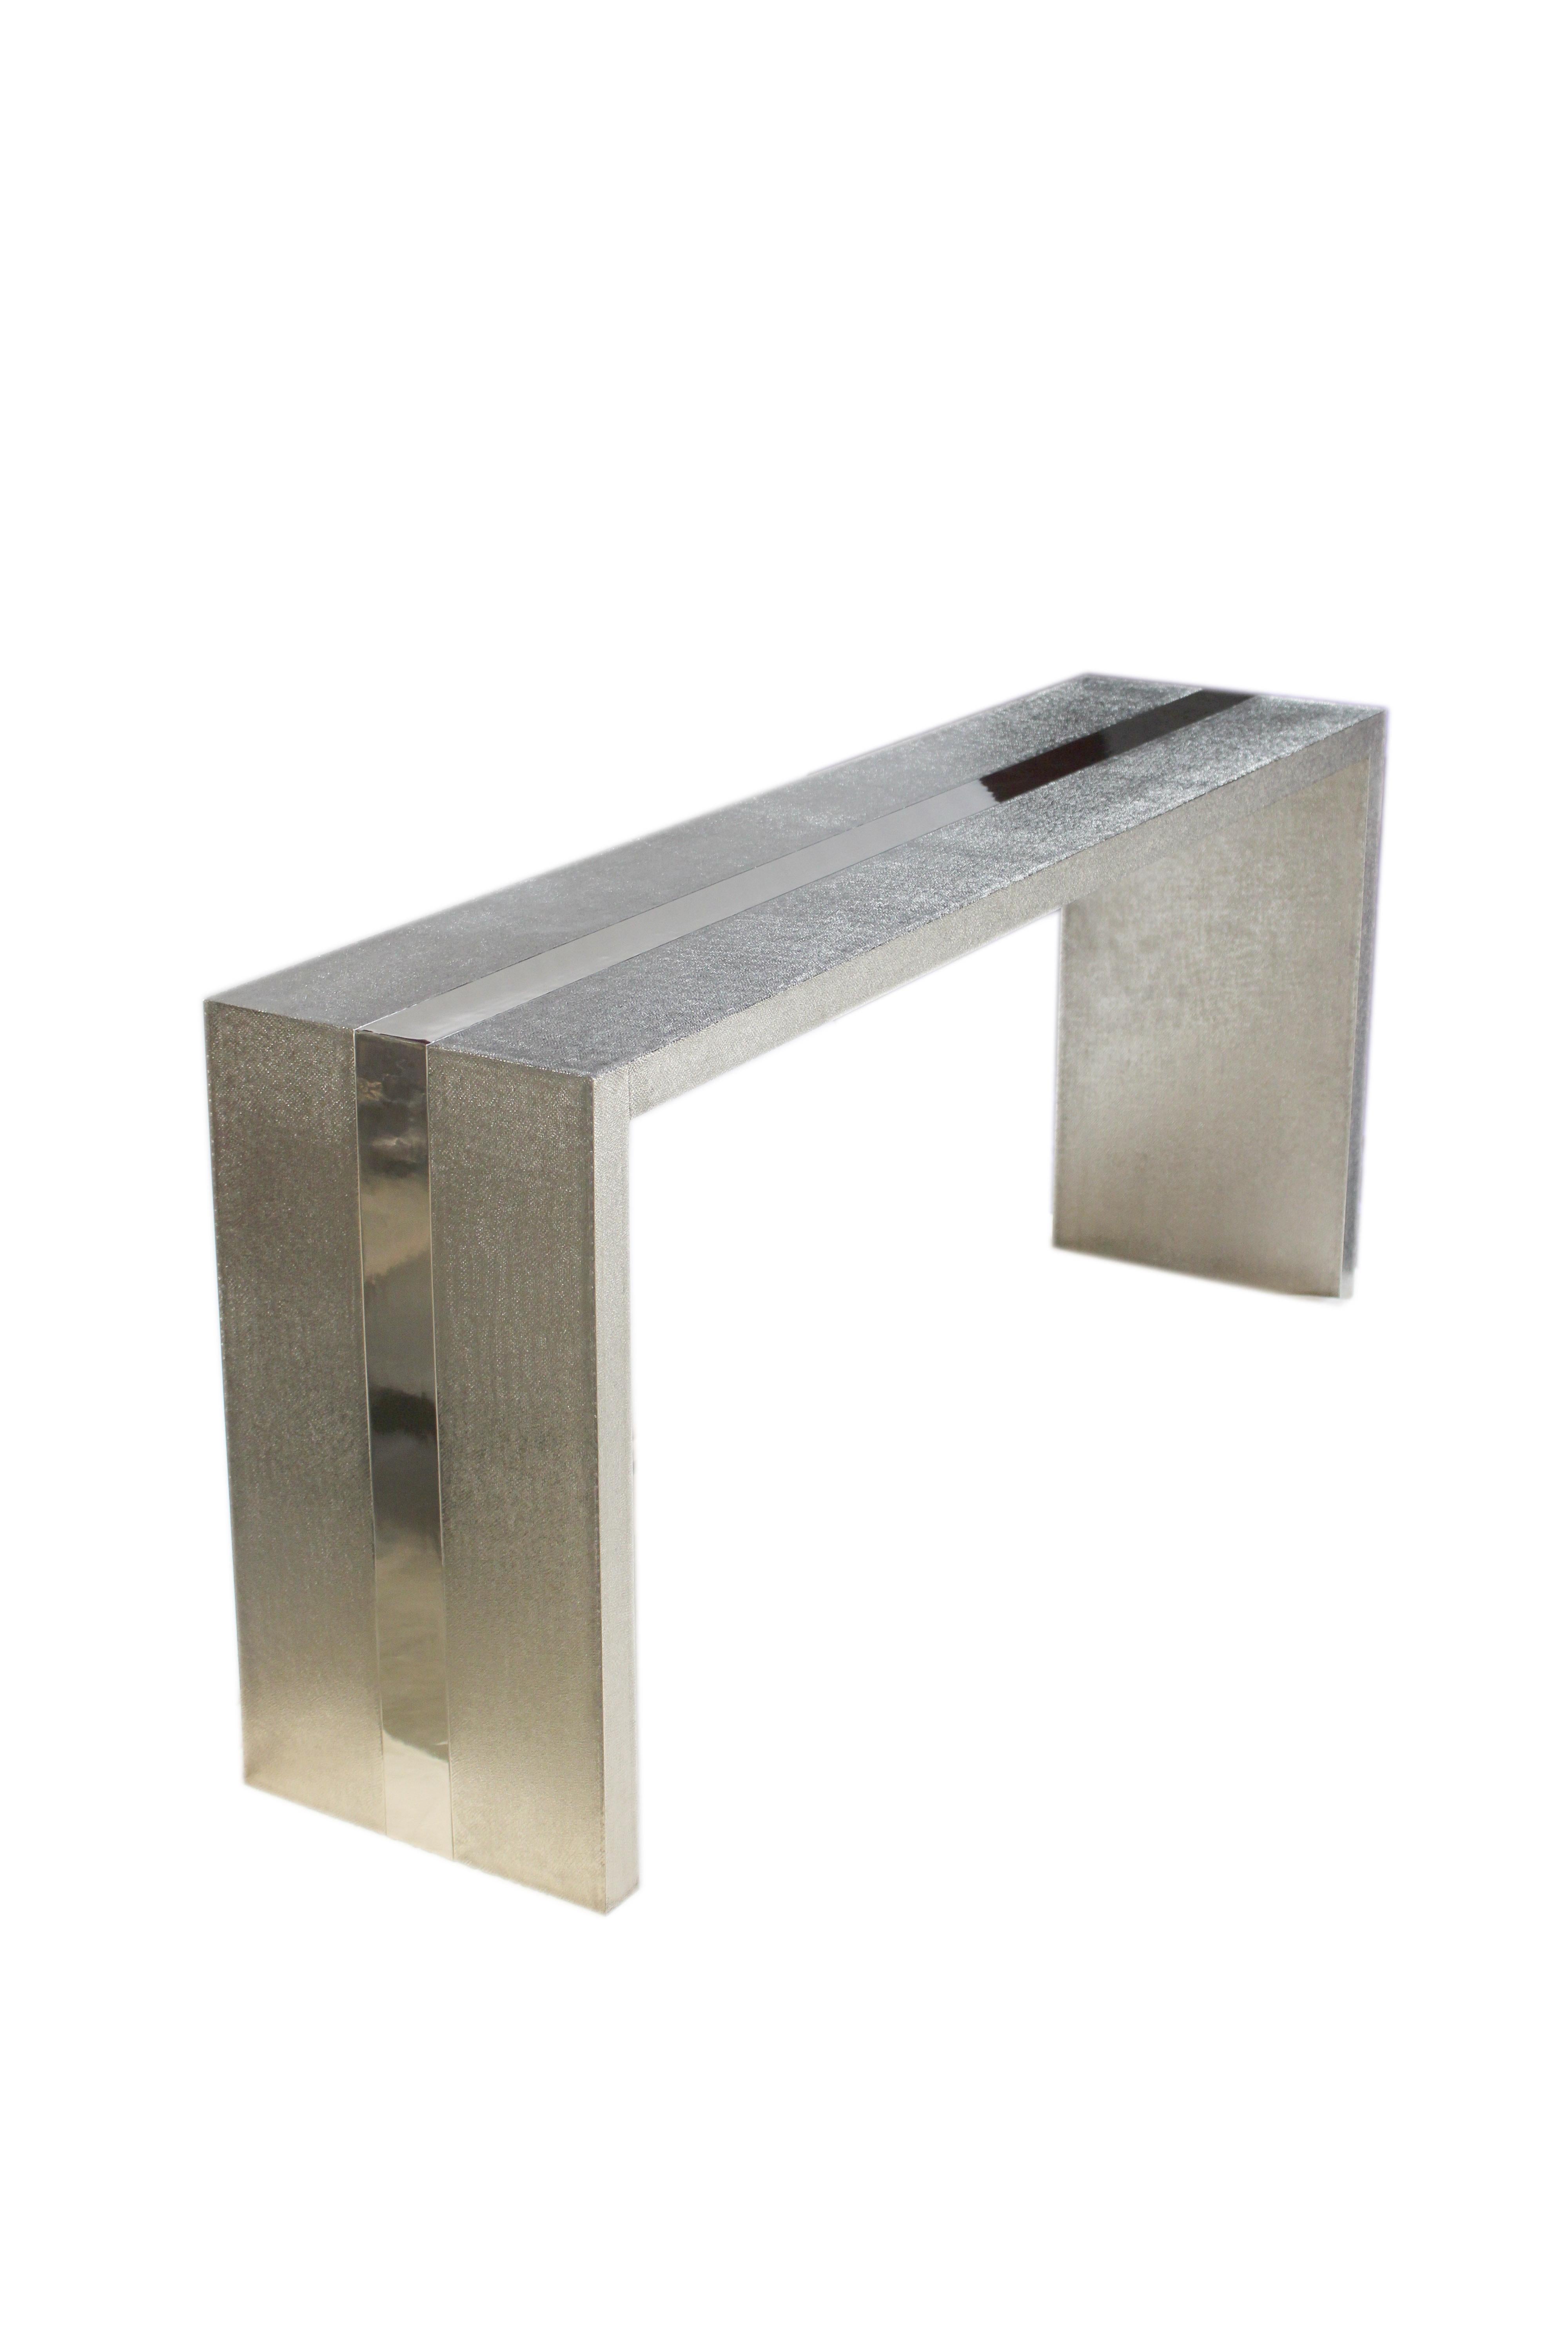 Art Deco Rectangular Console Tables Fine Hammered White Bronze by Alison Spear For Sale 5